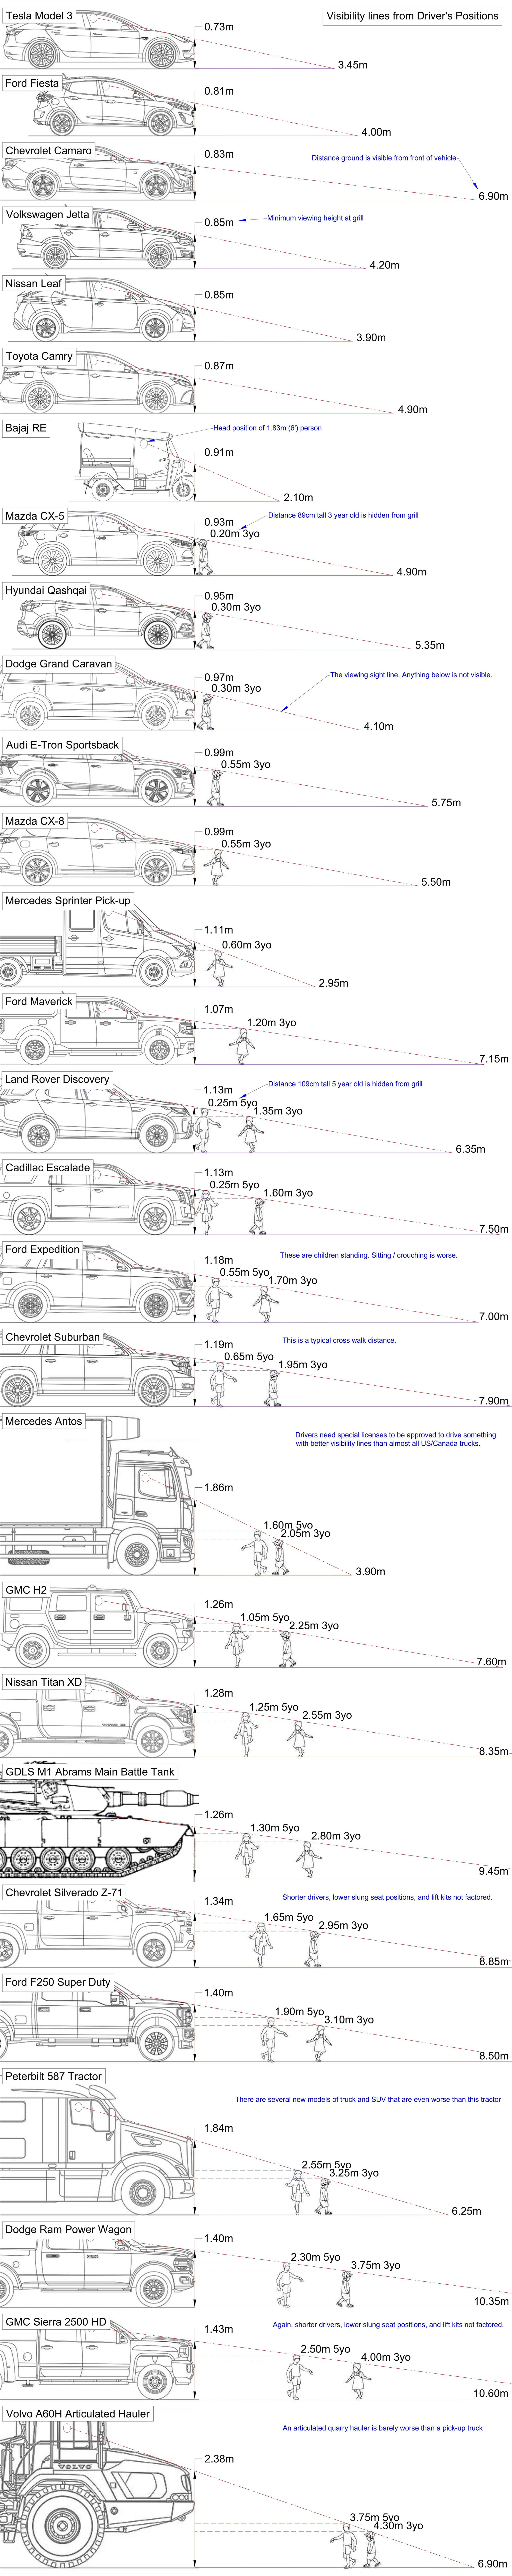 Comparing Viewlines of Various Trucks and Tanks (2023, Myles Russell, Civil Engineering Technologist)